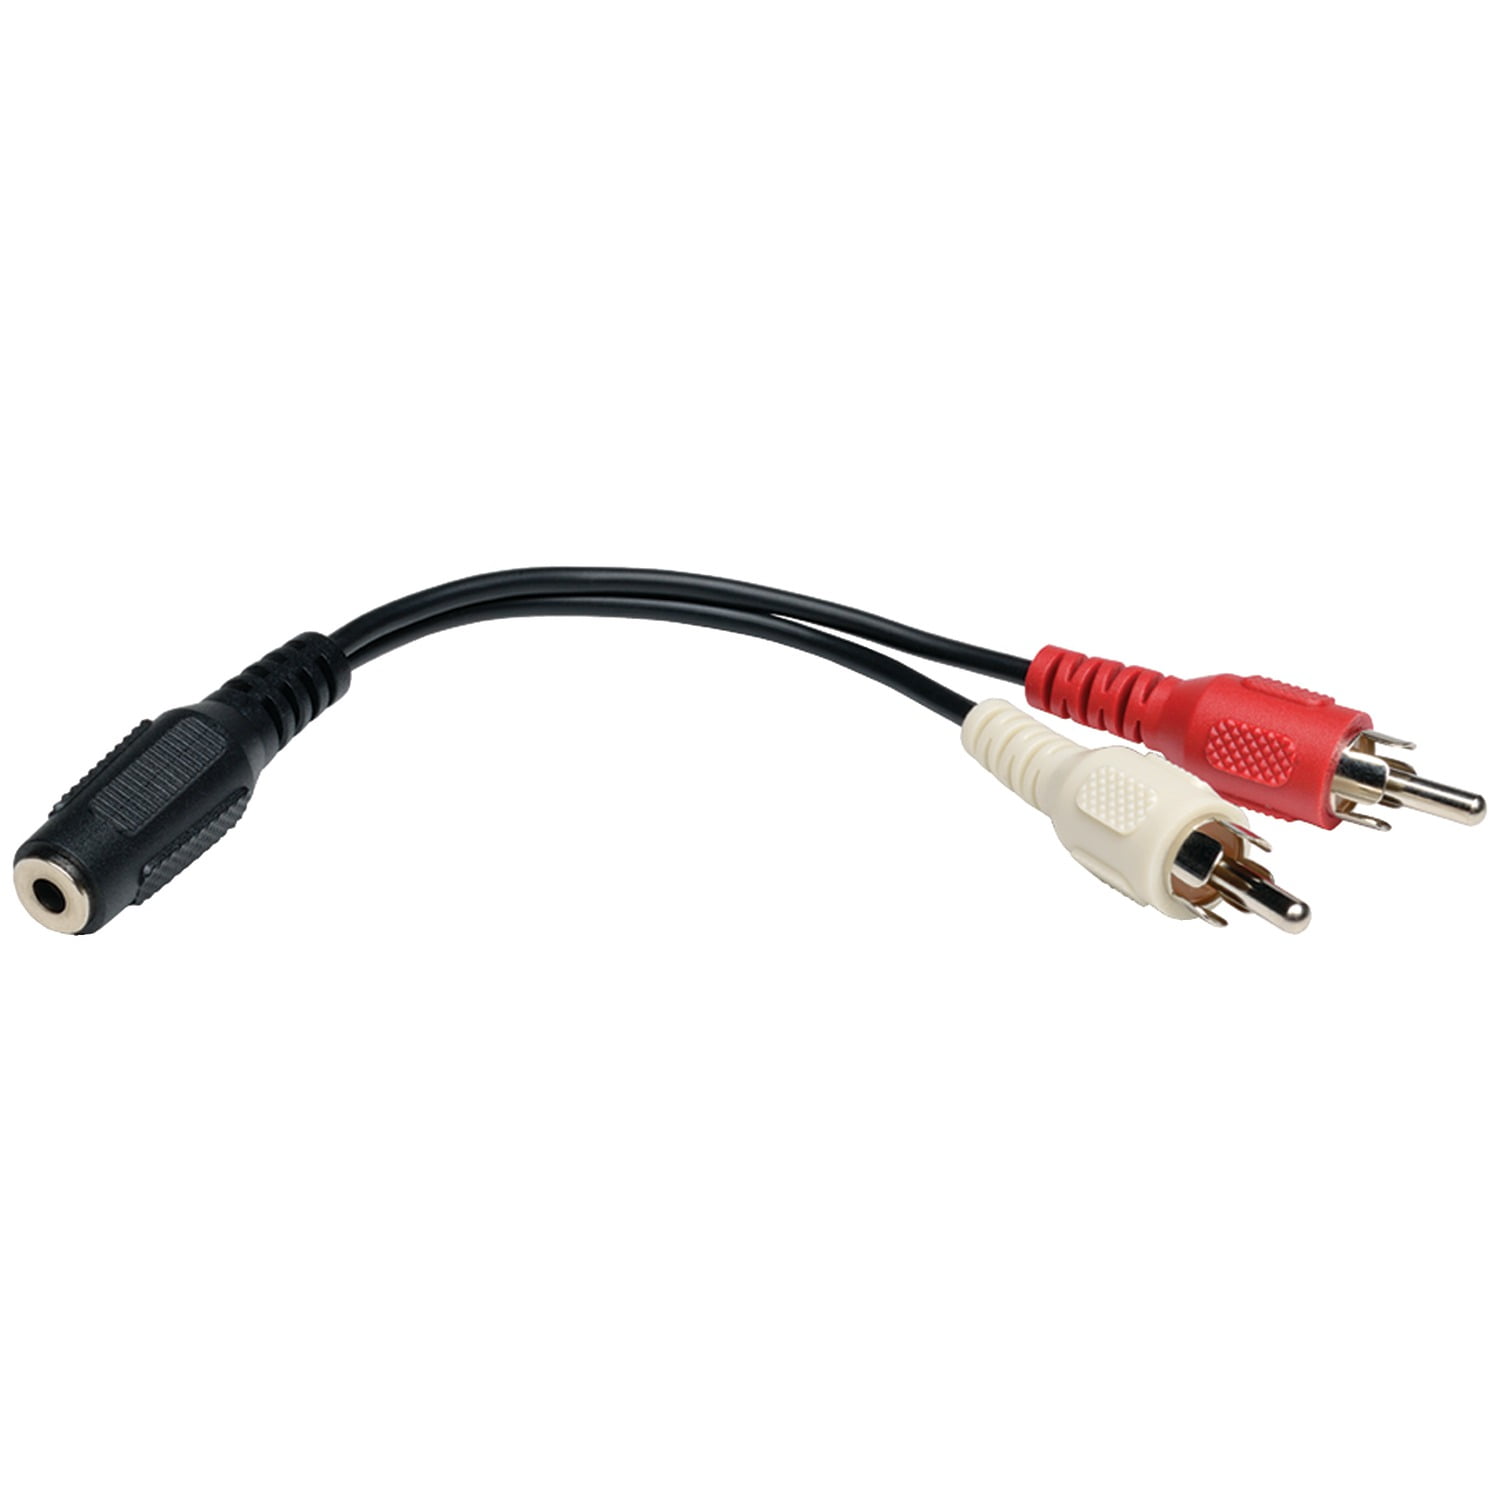 Pack of 5 Y Splitter Cable 3.5mm Female Aux to RCA 2 Male 6" Length Stereo Audio 